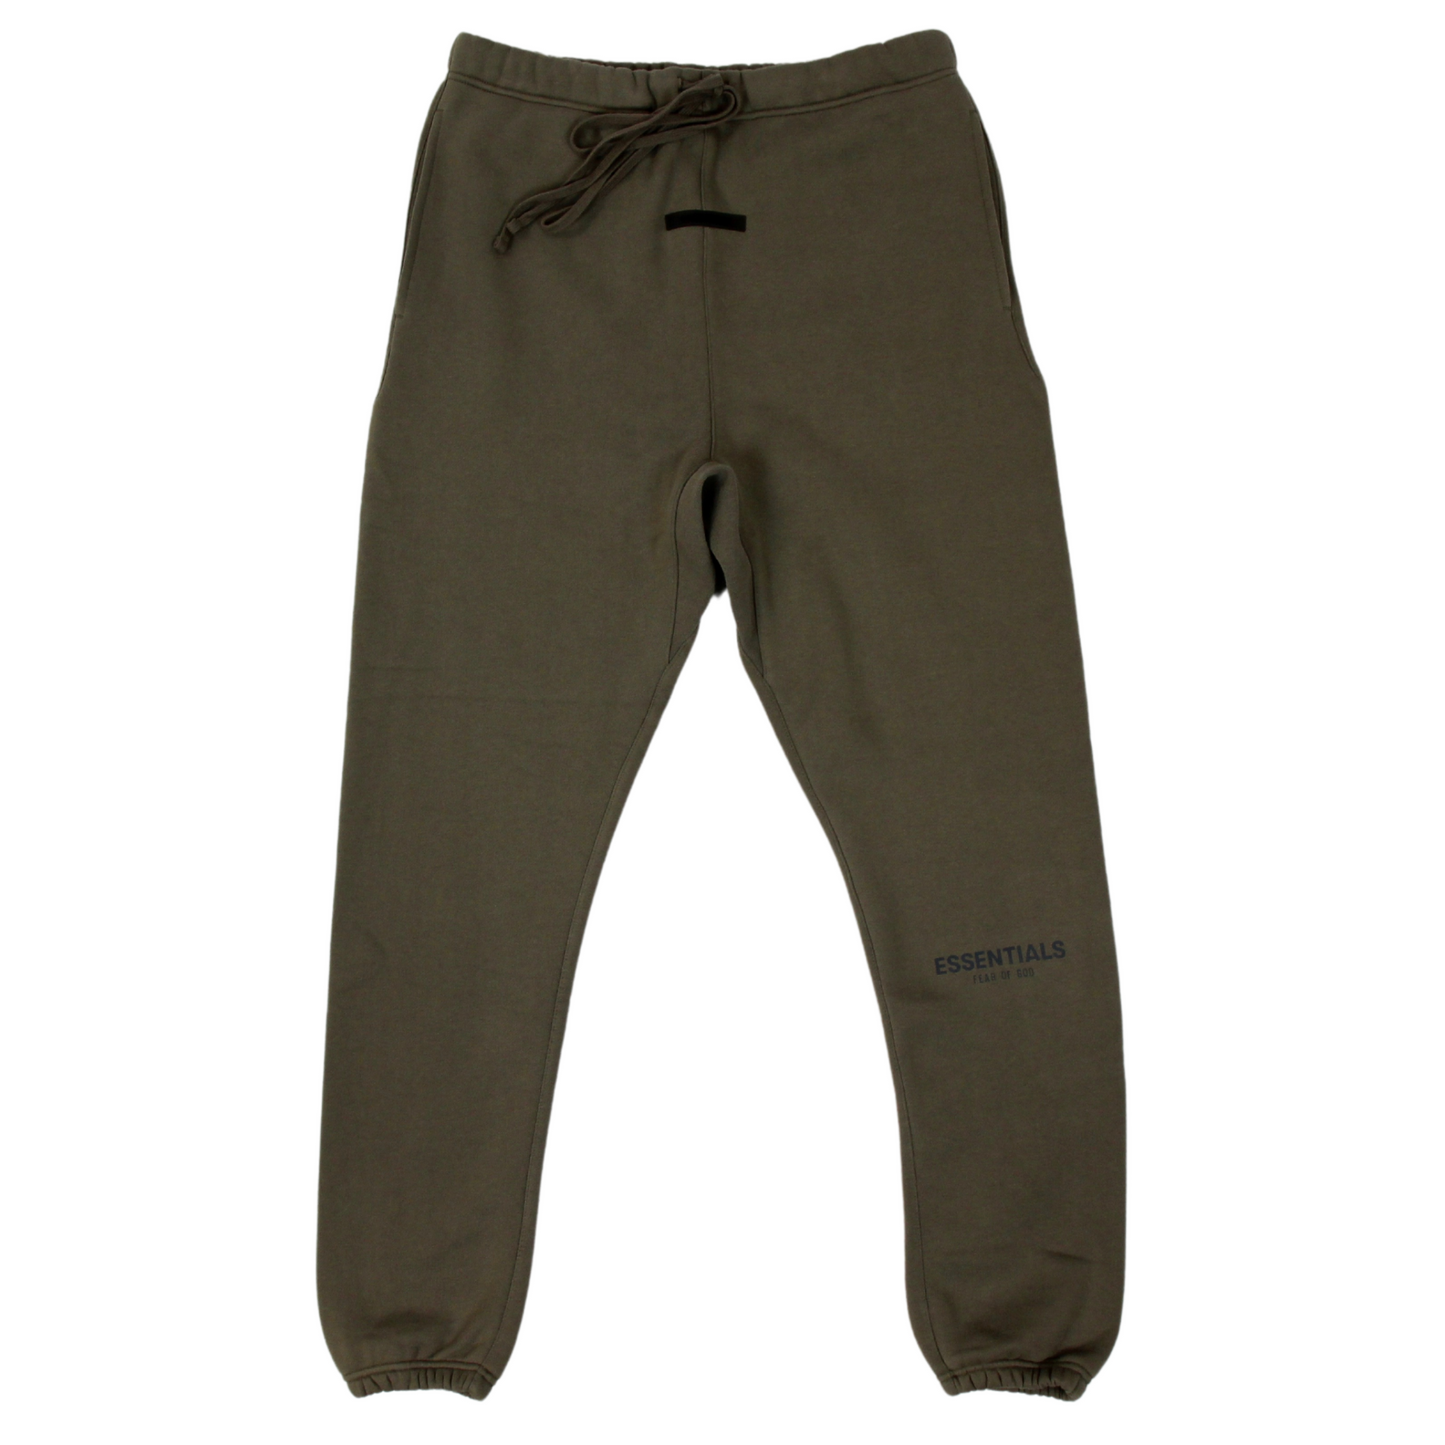 FEAR OF GOD ESSENTIALS Sweatpants (Taupe)